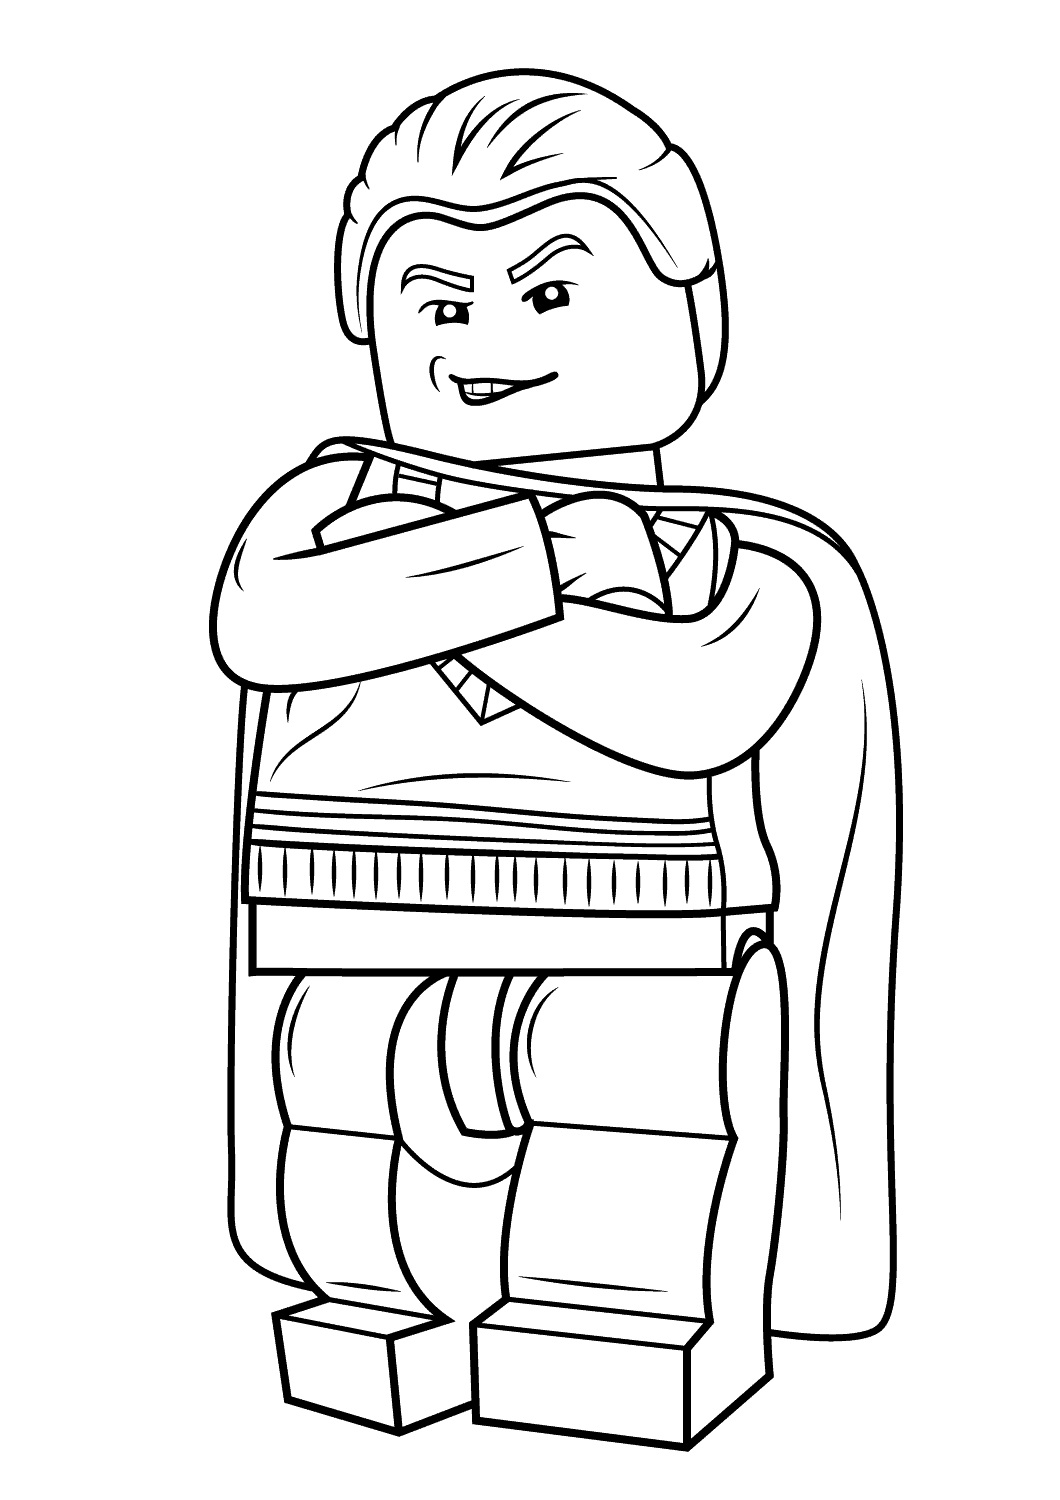 Lego Harry Potter Draco Malfoy Coloring Page